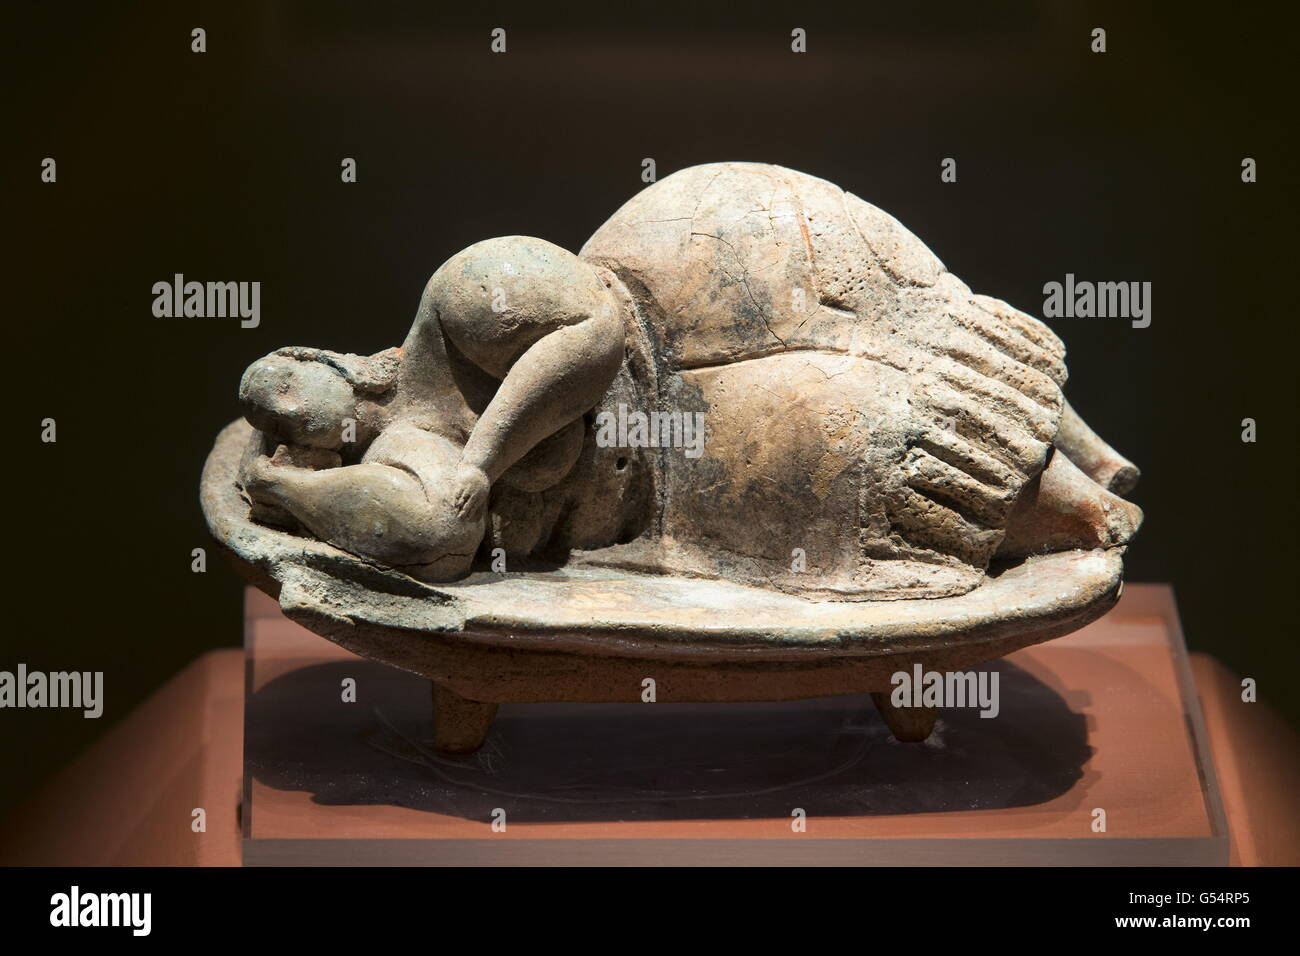 The 'Sleeping Lady' in the Archaeological Museum in Valletta, the capital of Malta. The photo was taken in July 2014. Photo: Tom Schulze | usage worldwide Stock Photo